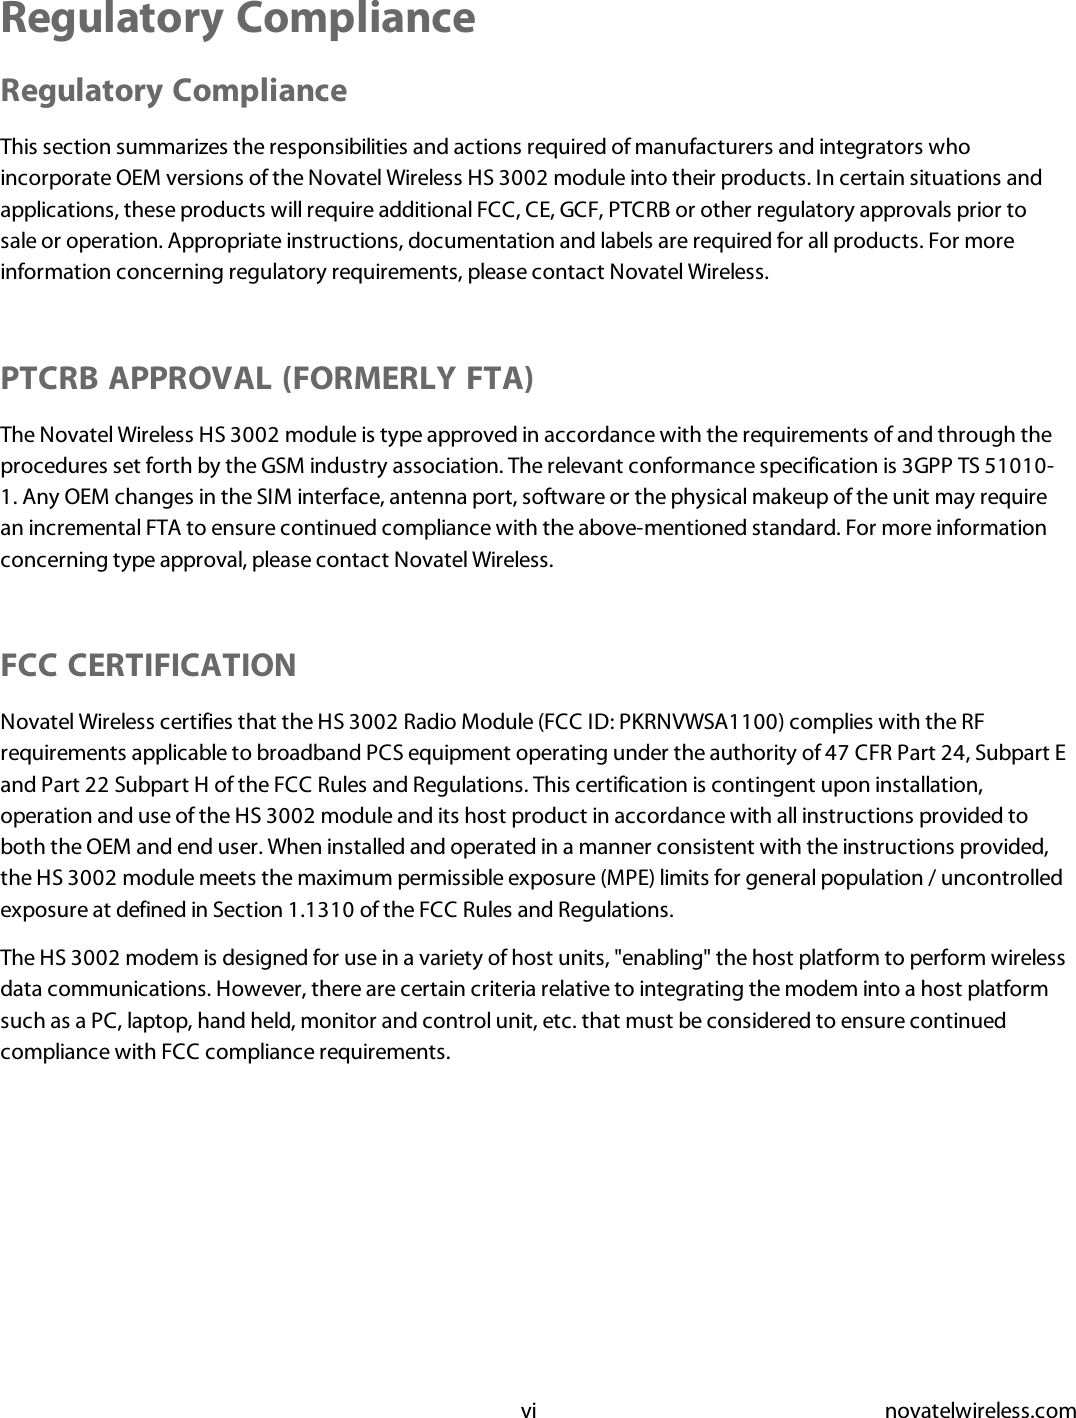 vi novatelwireless.comRegulatory ComplianceRegulatory ComplianceThis section summarizes the responsibilities and actions required of manufacturers and integrators whoincorporate OEM versions of the Novatel Wireless HS 3002 module into their products. In certain situations andapplications, these products will require additional FCC, CE, GCF, PTCRB or other regulatory approvals prior tosale or operation. Appropriate instructions, documentation and labels are required for all products. For moreinformation concerning regulatory requirements, please contact Novatel Wireless.PTCRB APPROVAL (FORMERLY FTA)The Novatel Wireless HS 3002 module is type approved in accordance with the requirements of and through theprocedures set forth by the GSM industry association. The relevant conformance specification is 3GPP TS 51010-1. Any OEM changes in the SIM interface, antenna port, software or the physical makeup of the unit may requirean incremental FTA to ensure continued compliance with the above-mentioned standard. For more informationconcerning type approval, please contact Novatel Wireless.FCC CERTIFICATIONNovatel Wireless certifies that the HS 3002 Radio Module (FCC ID: PKRNVWSA1100) complies with the RFrequirements applicable to broadband PCS equipment operating under the authority of 47 CFR Part 24, Subpart Eand Part 22 Subpart H of the FCC Rules and Regulations. This certification is contingent upon installation,operation and use of the HS 3002 module and its host product in accordance with all instructions provided toboth the OEM and end user. When installed and operated in a manner consistent with the instructions provided,the HS 3002 module meets the maximum permissible exposure (MPE) limits for general population / uncontrolledexposure at defined in Section 1.1310 of the FCC Rules and Regulations.The HS 3002 modem is designed for use in a variety of host units, &quot;enabling&quot; the host platform to perform wirelessdata communications. However, there are certain criteria relative to integrating the modem into a host platformsuch as a PC, laptop, hand held, monitor and control unit, etc. that must be considered to ensure continuedcompliance with FCC compliance requirements.